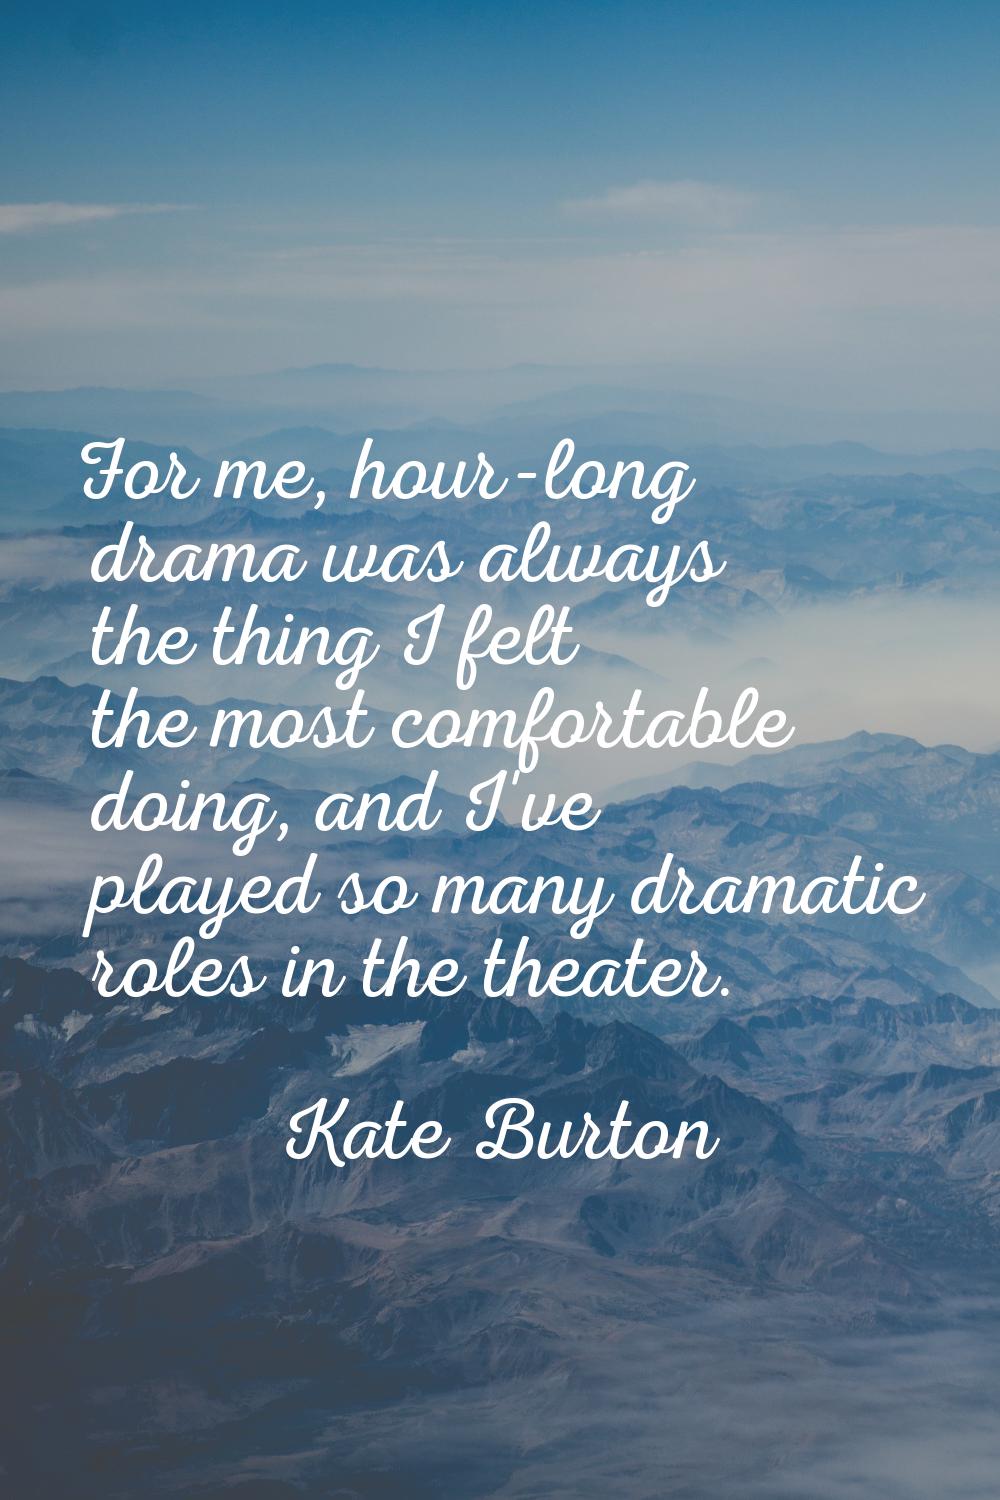 For me, hour-long drama was always the thing I felt the most comfortable doing, and I've played so 